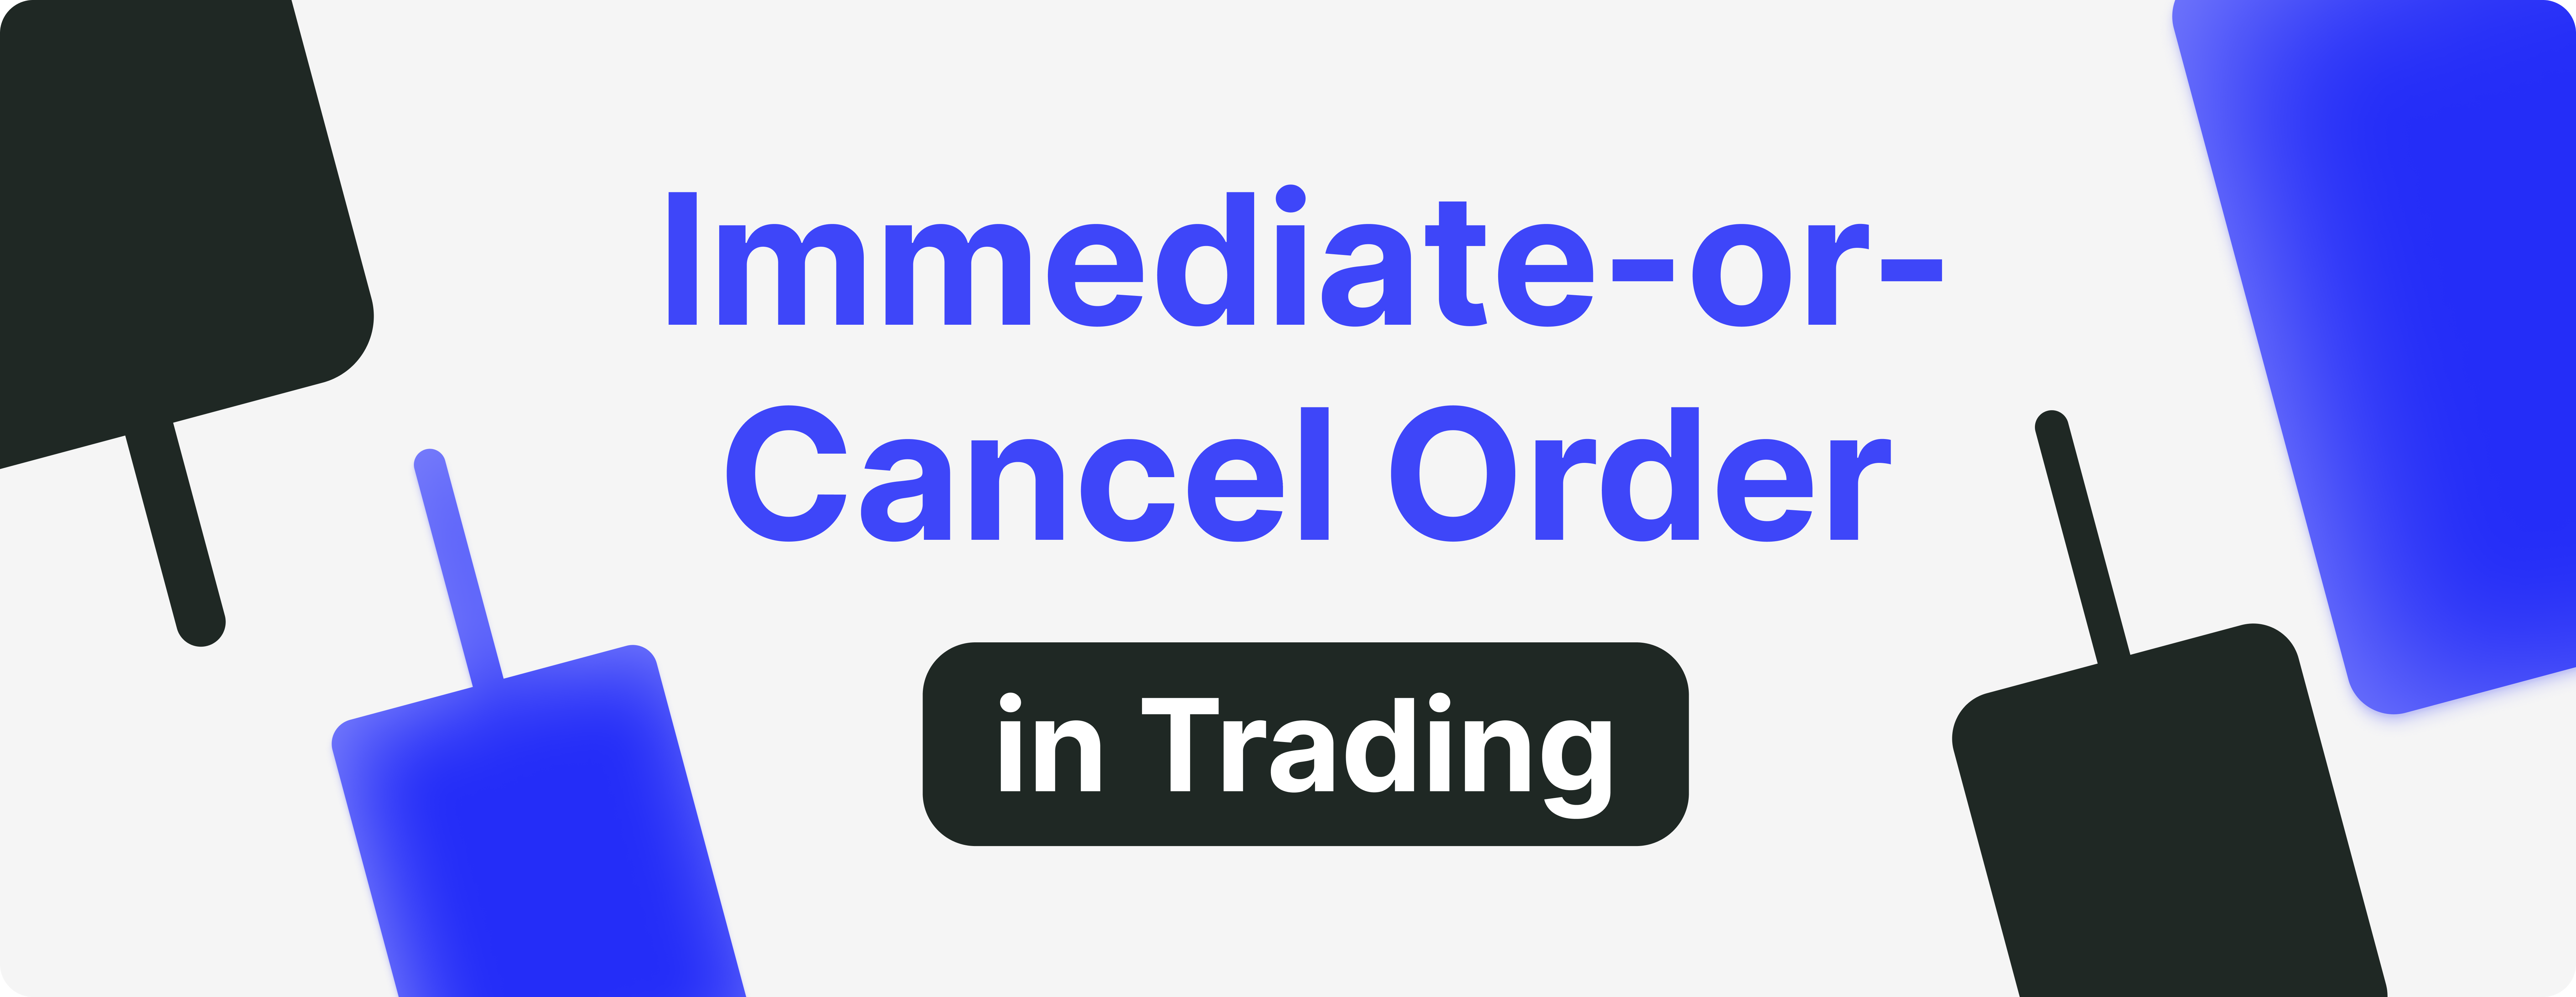 When is The Right Time to Use Immediate-Or-Cancel Order in Trading?